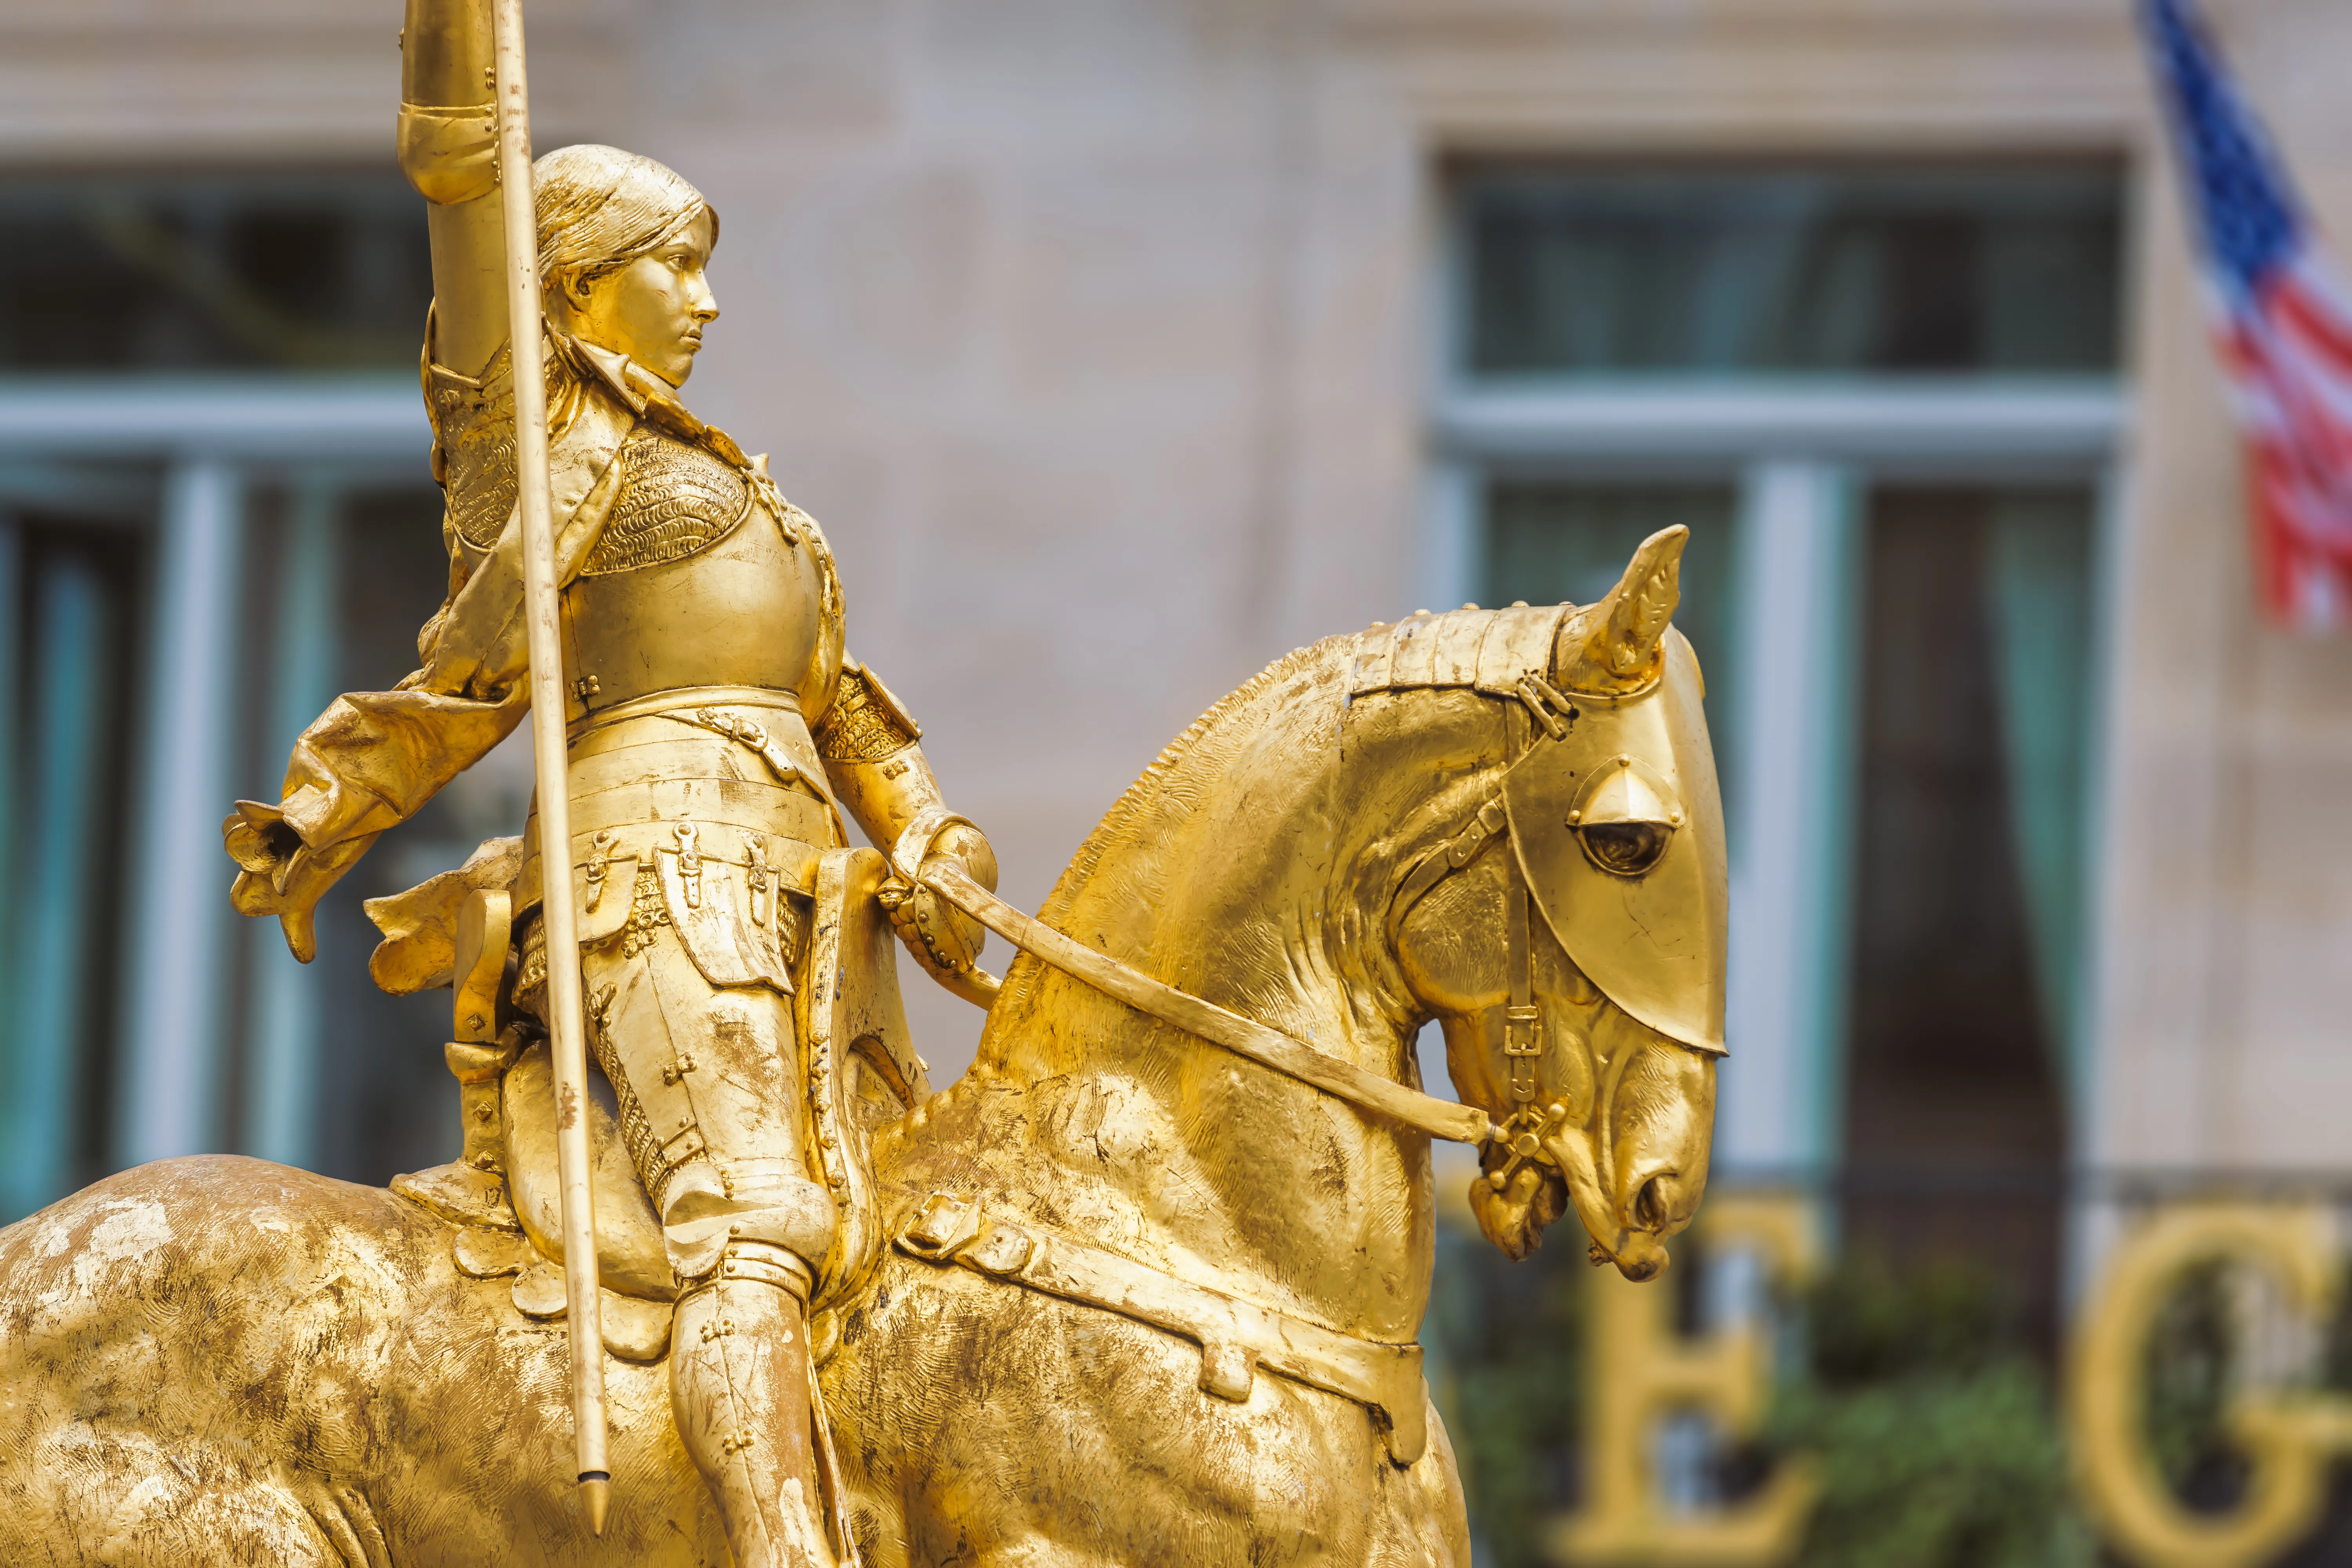 Side view of the gilded statue of Joan of Arc at Place des Pyramides in Paris, France.?w=200&h=150